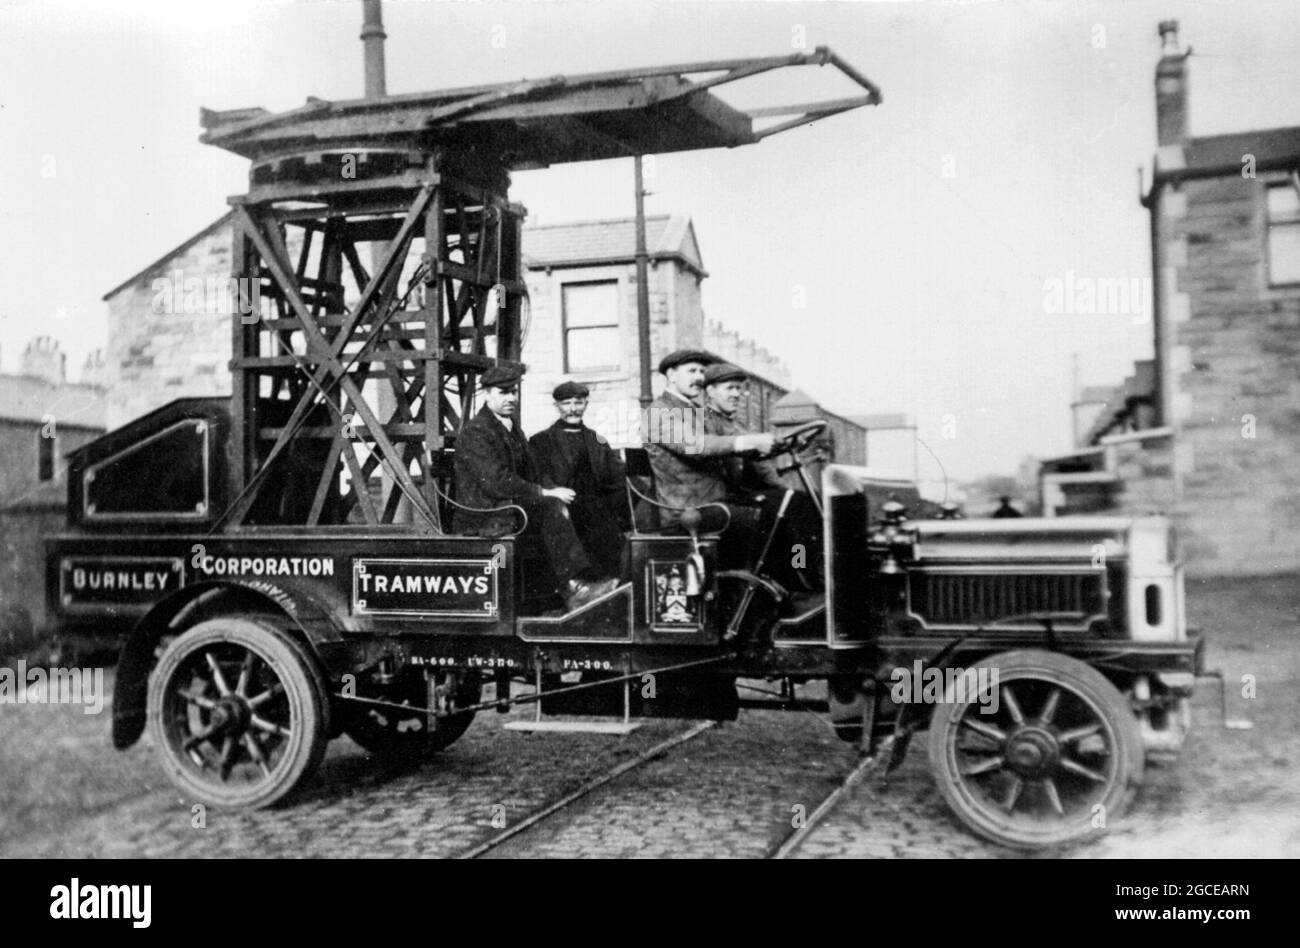 Burnley Tramways overhead wire maintenance truck, early 1900s Stock Photo